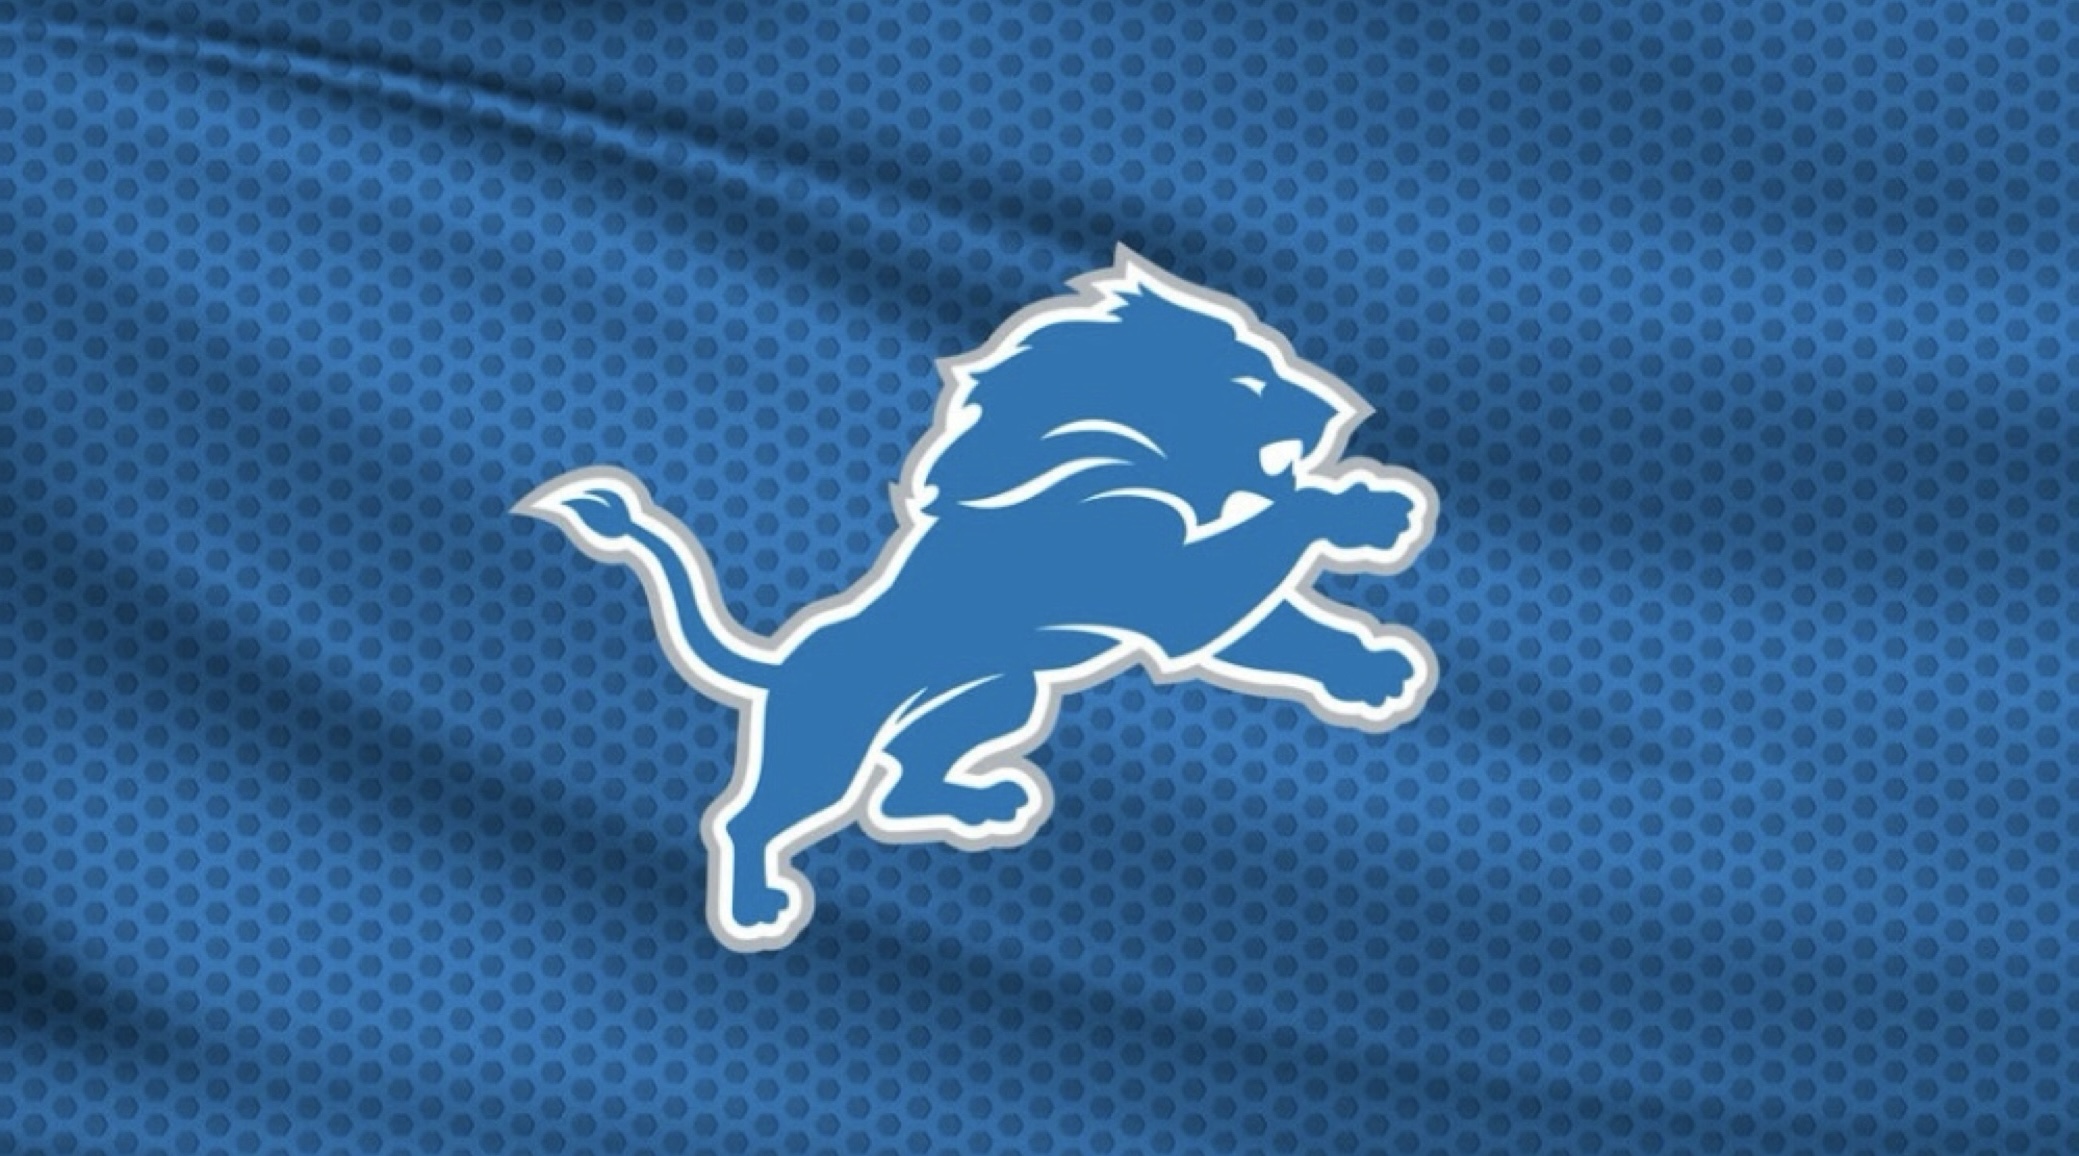 Detroit Lions football play off tickets giveaway entry terms and